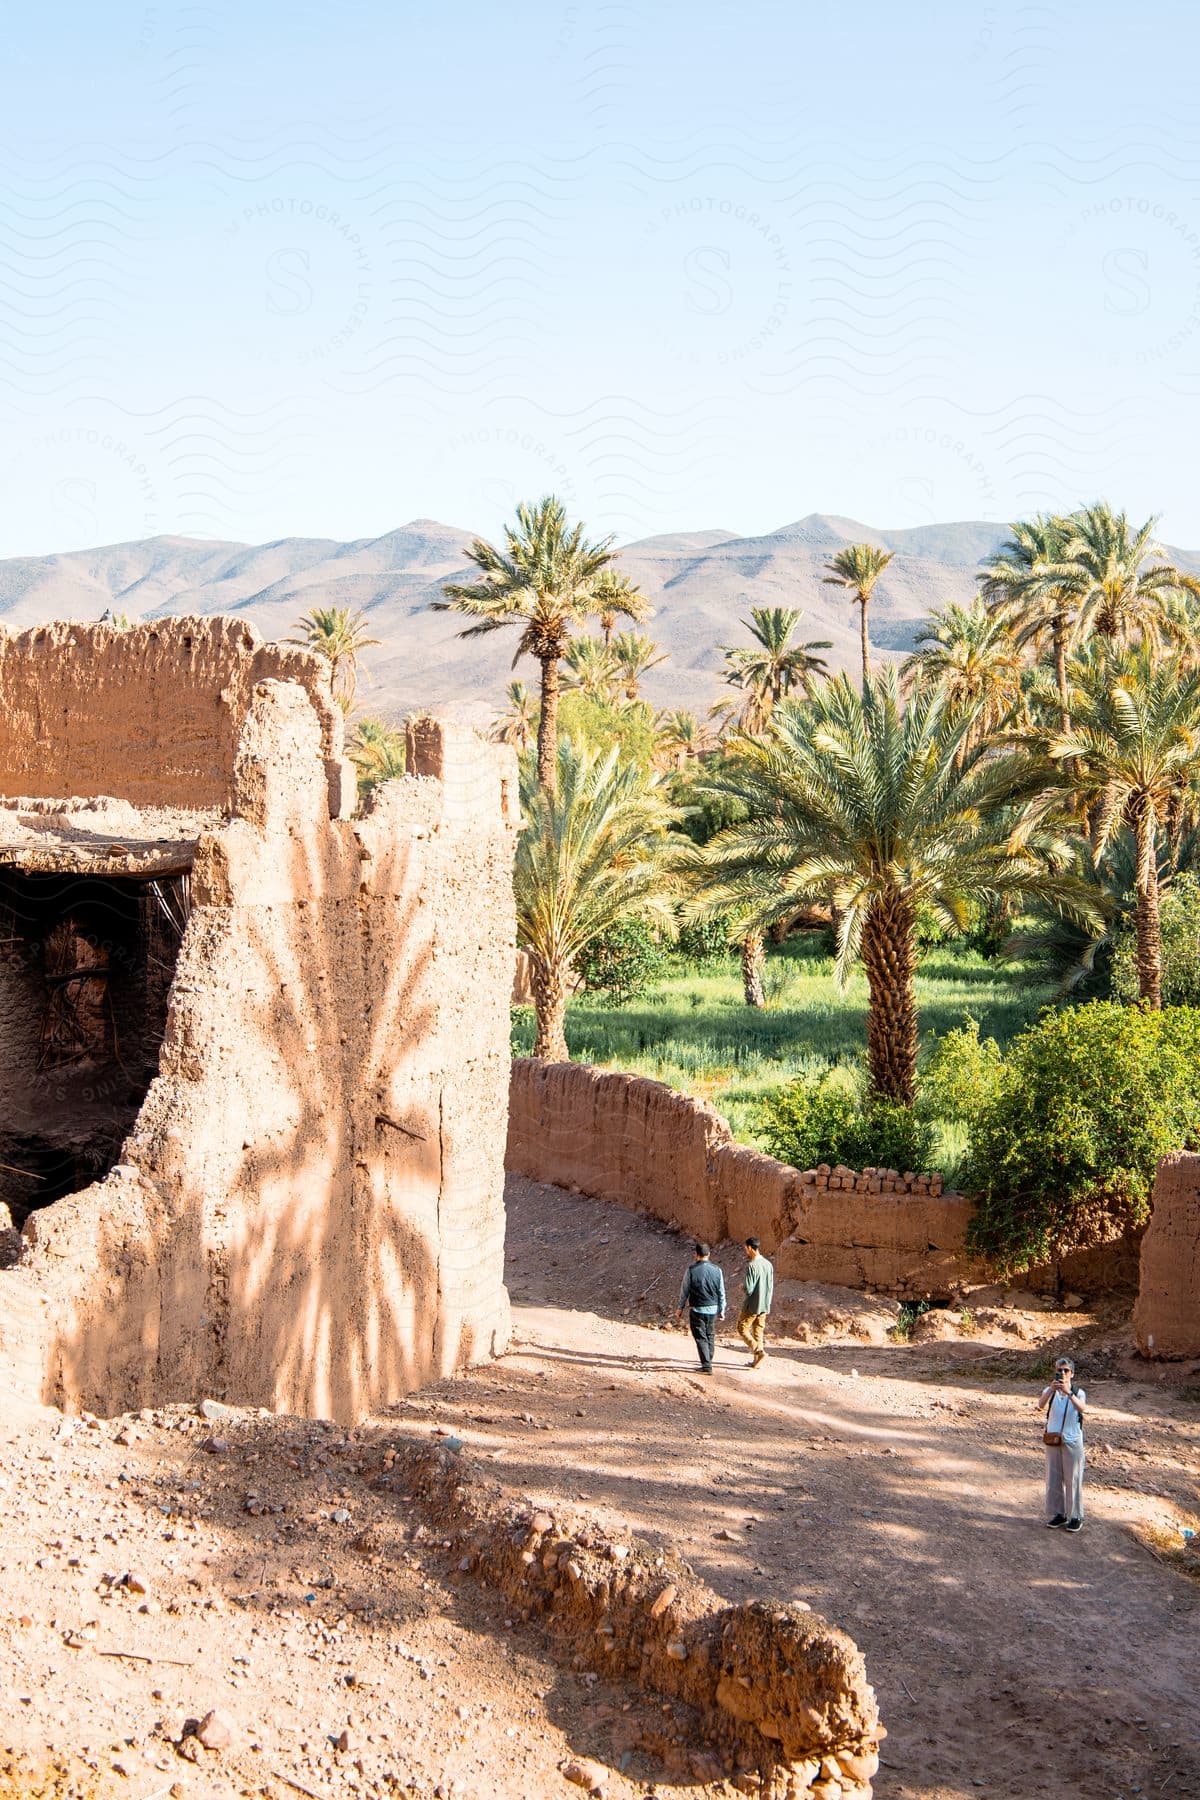 Ruins of clay buildings with an oasis of palm trees in the background under a clear sky and tourists strolling by.